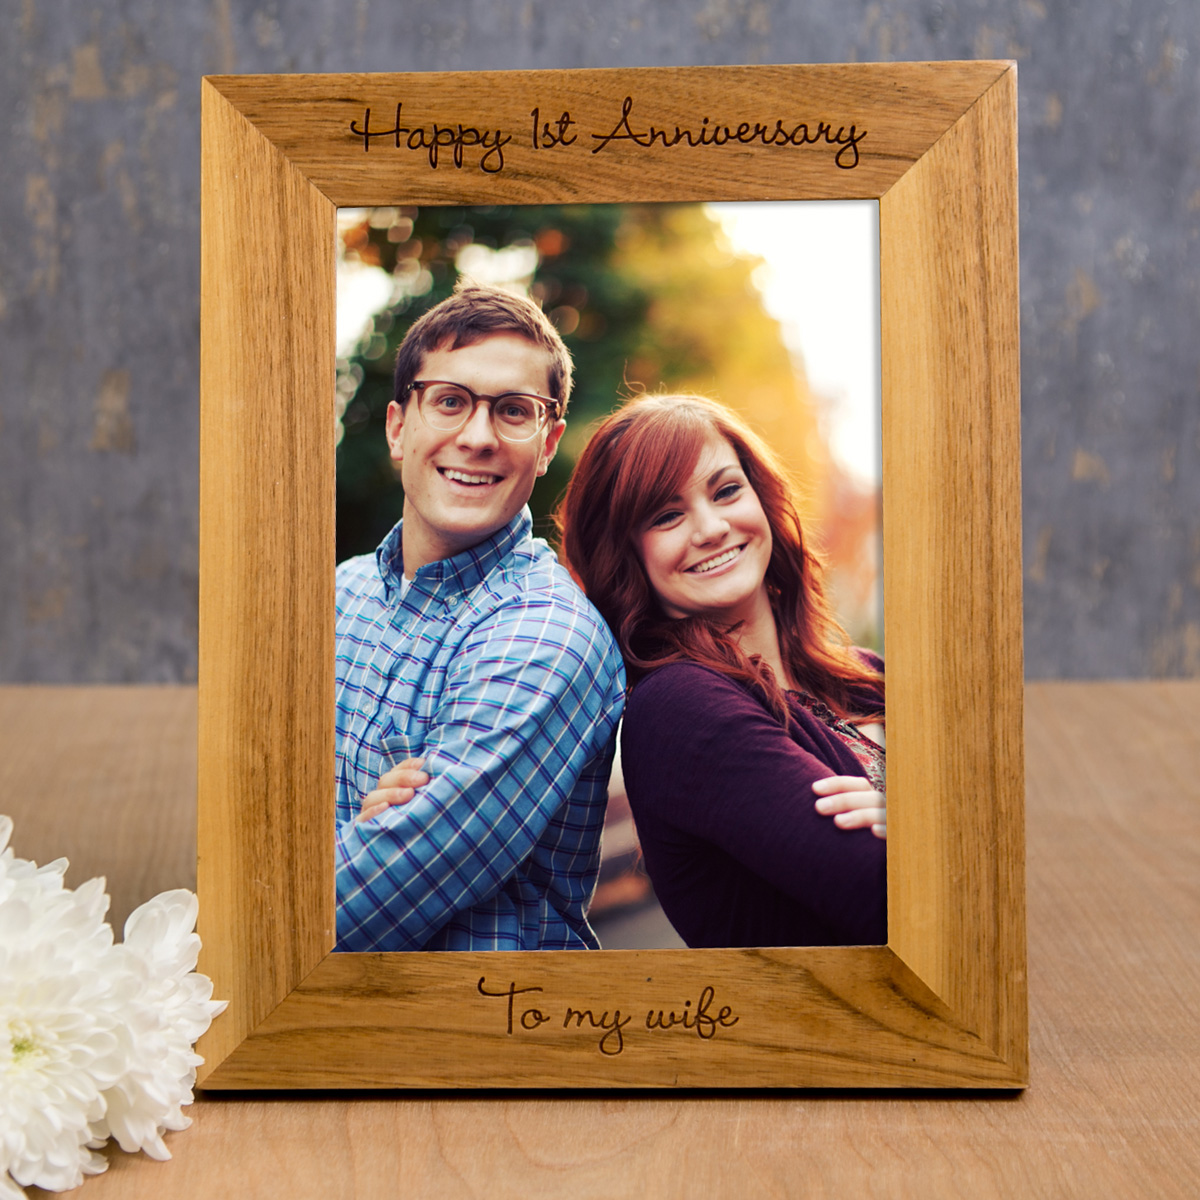 Personalised Engraved Wooden Photo Frame - Any Message